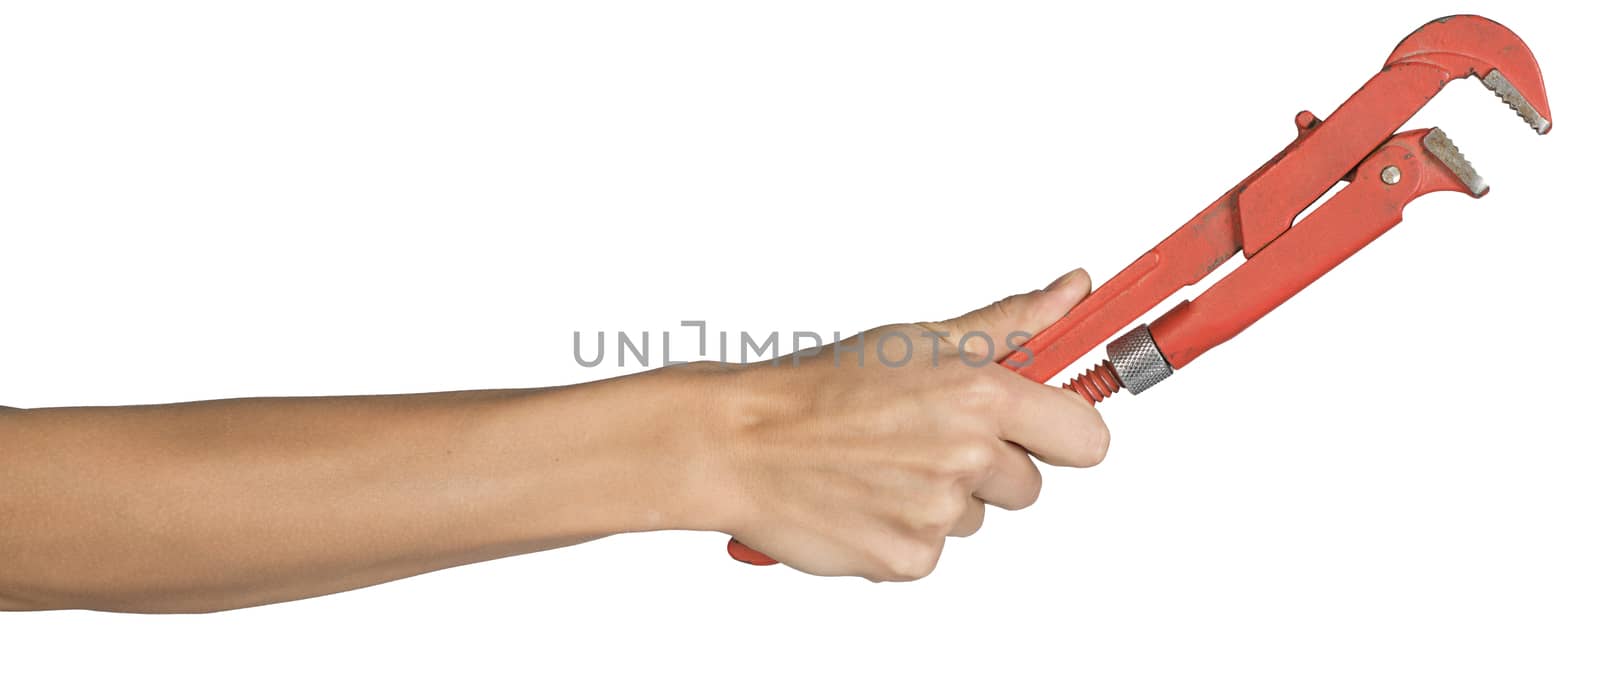 Female hand, bare, holding gas wrench, isolated over white background